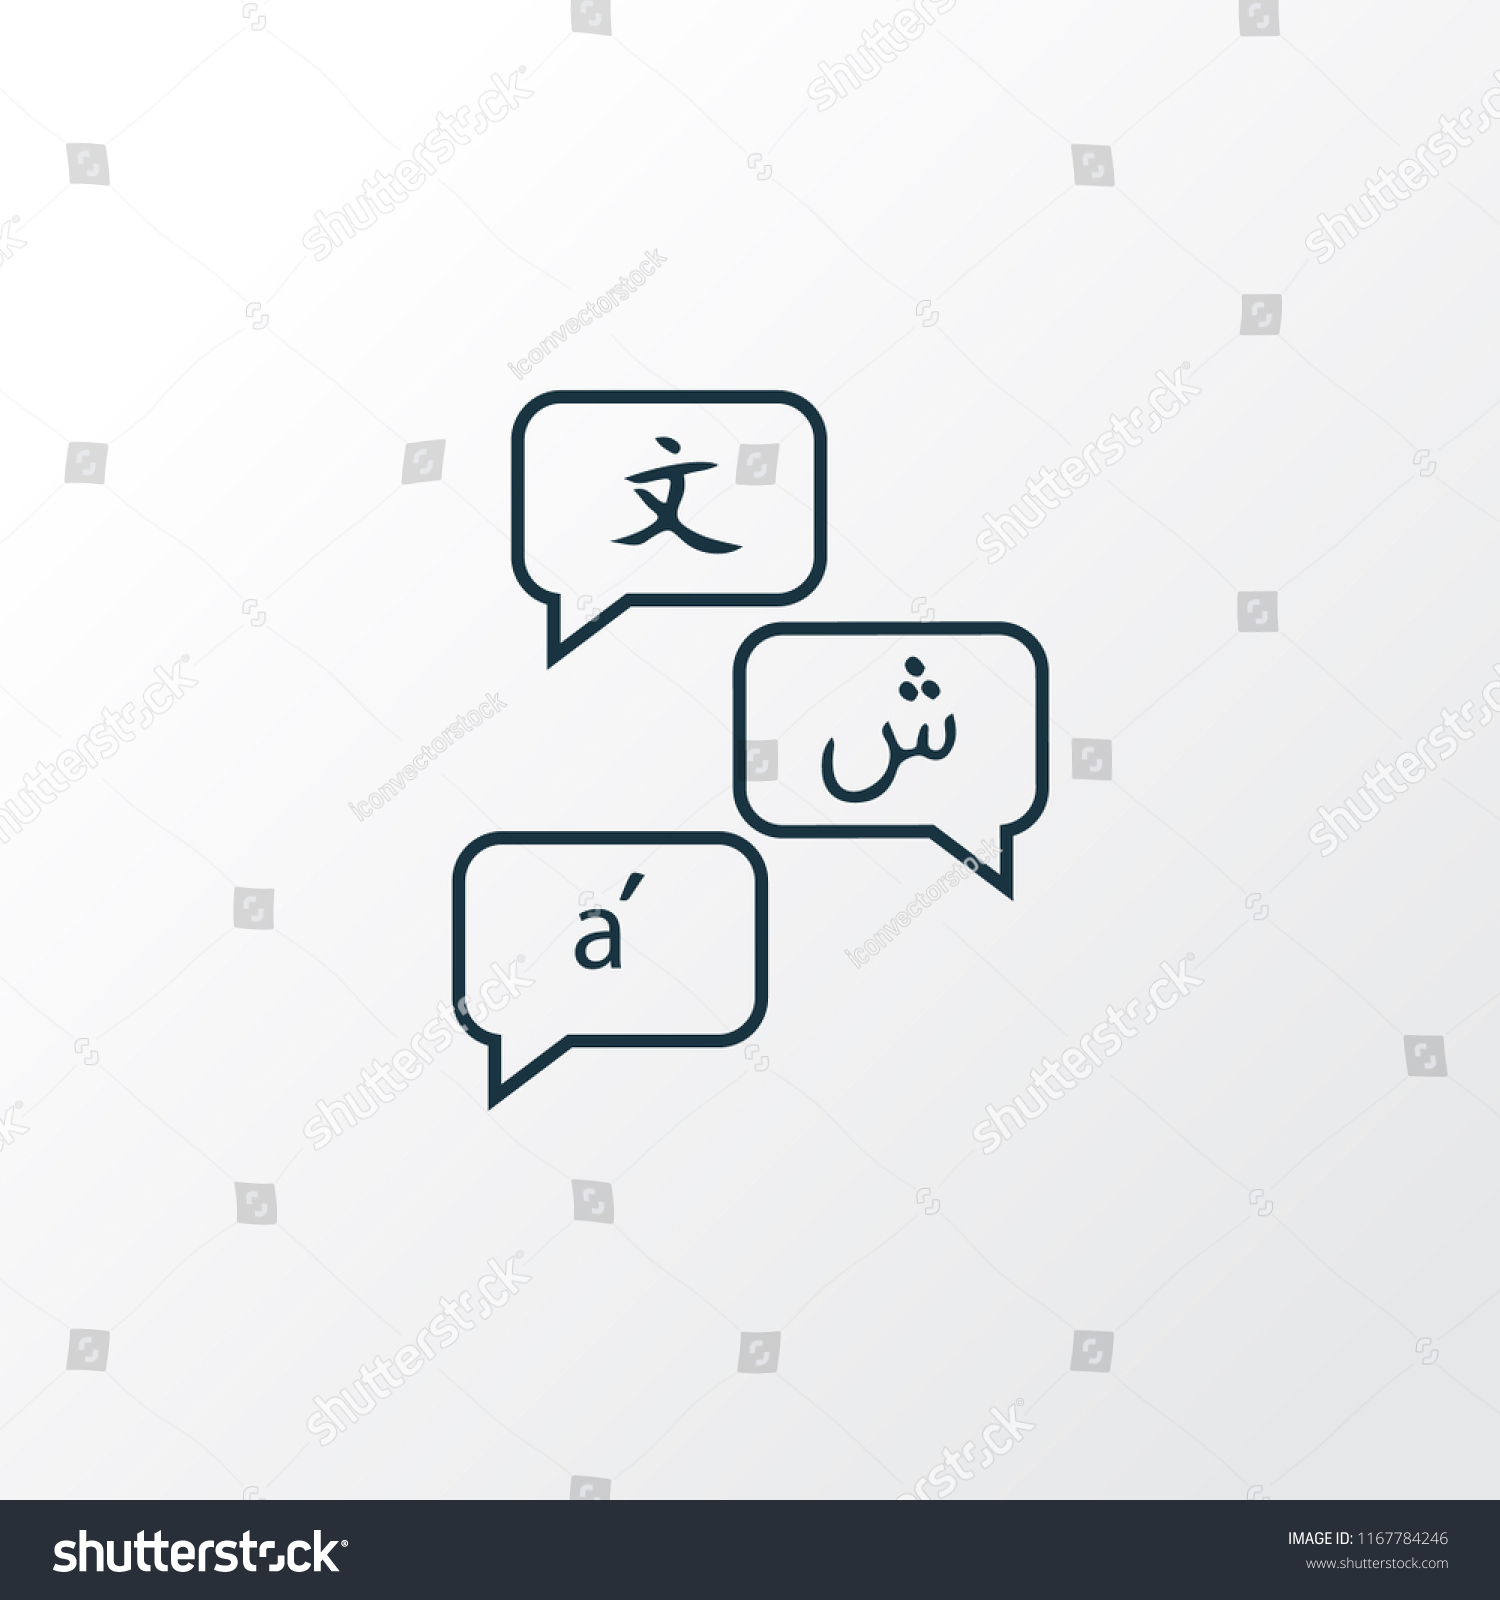 SVG of Languages icon line symbol. Premium quality isolated translation element in trendy style. svg